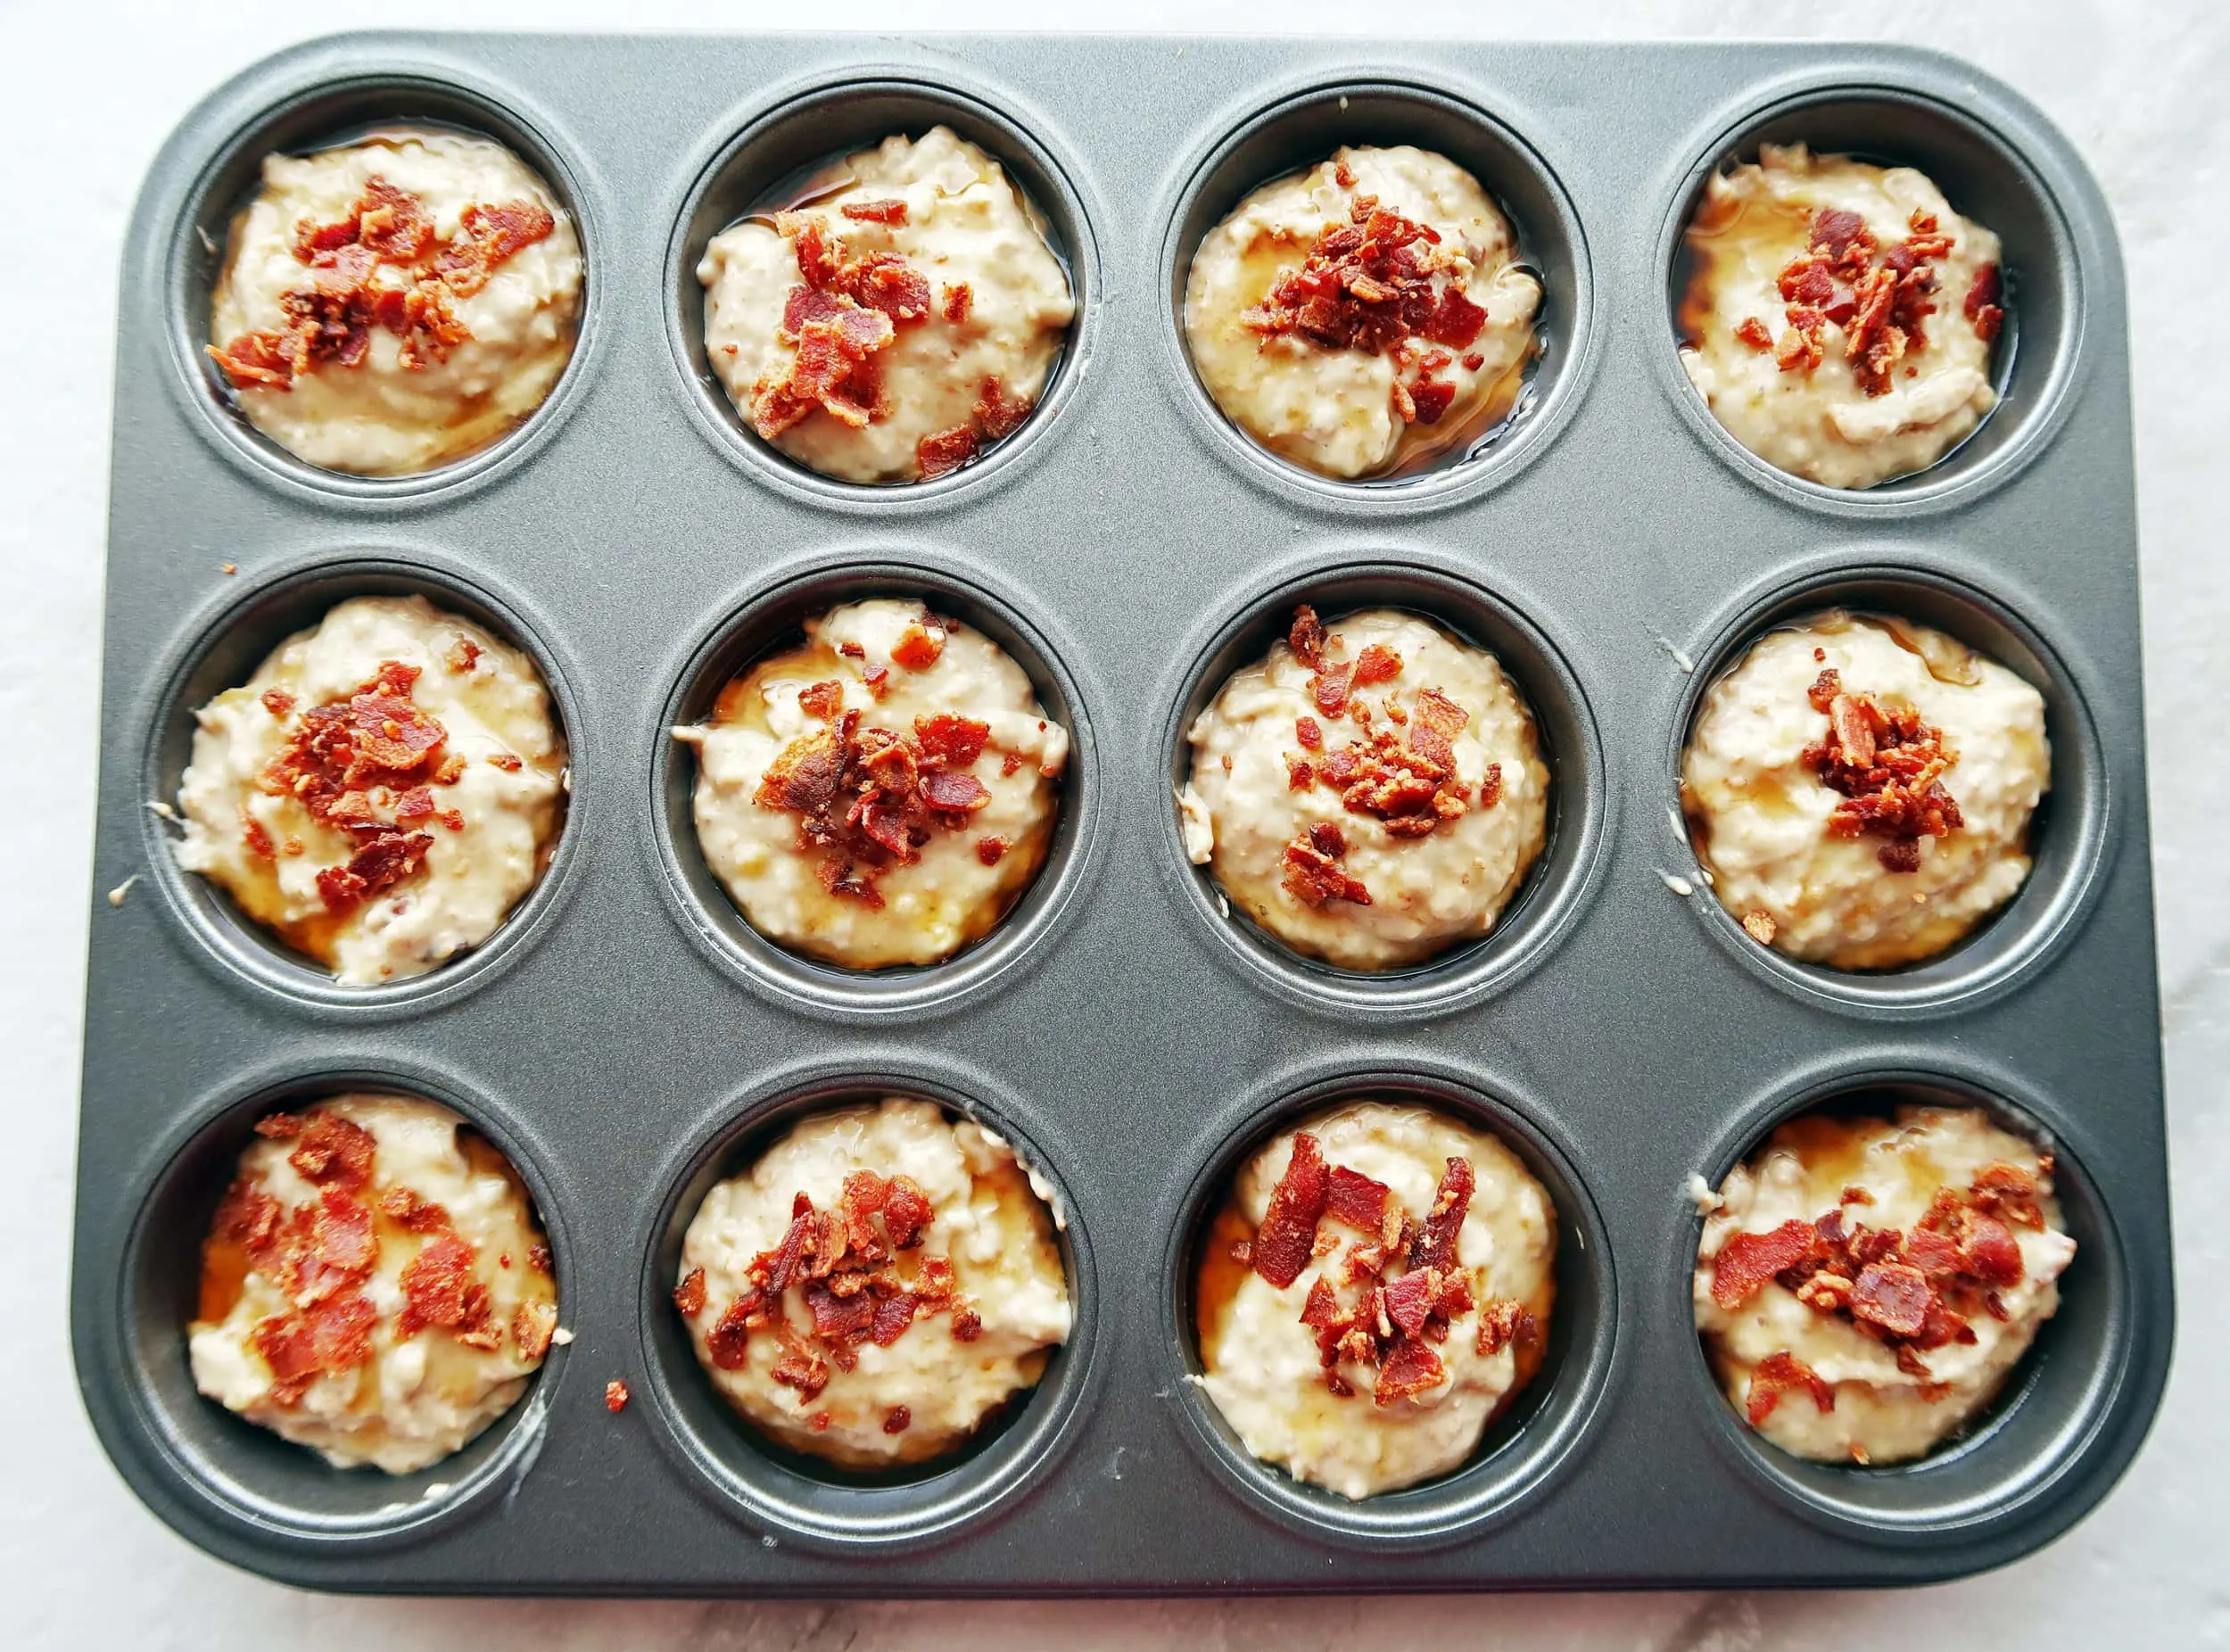 Muffin batter in a baking pan topped with bacon pieces.